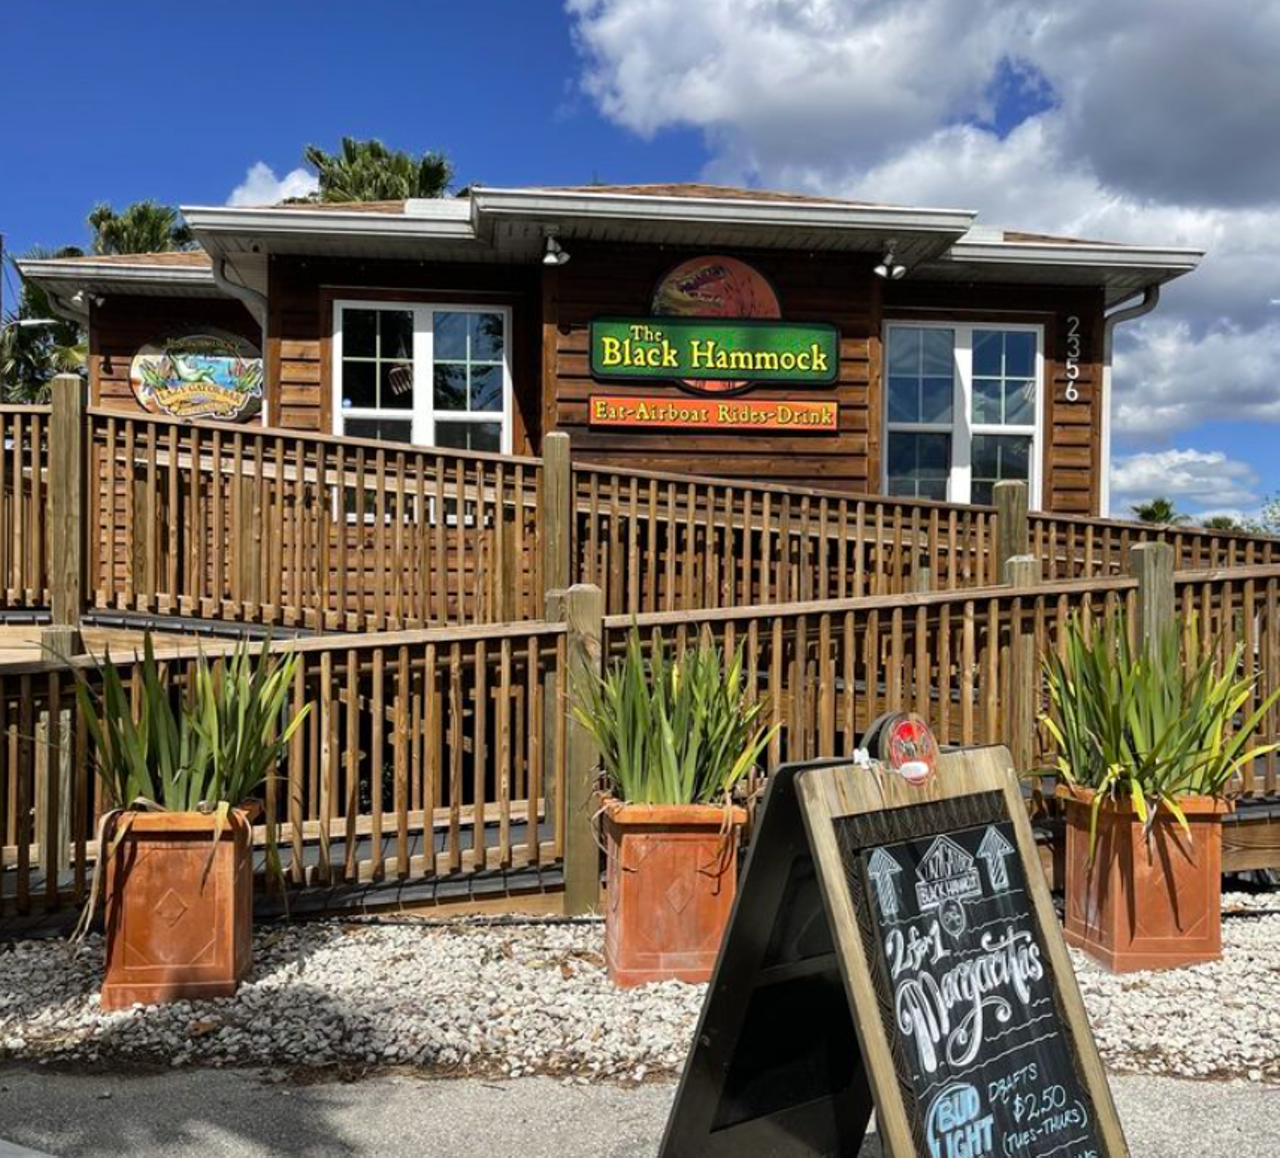 Black Hammock Restaurant
2316 Black Hammock Fish Camp Road, Oviedo
This Oviedo favorite acts as the adjoining restaurant to a marina and airboat spot. Grab a seafood-centric meal before you soak up some Central Florida sun.